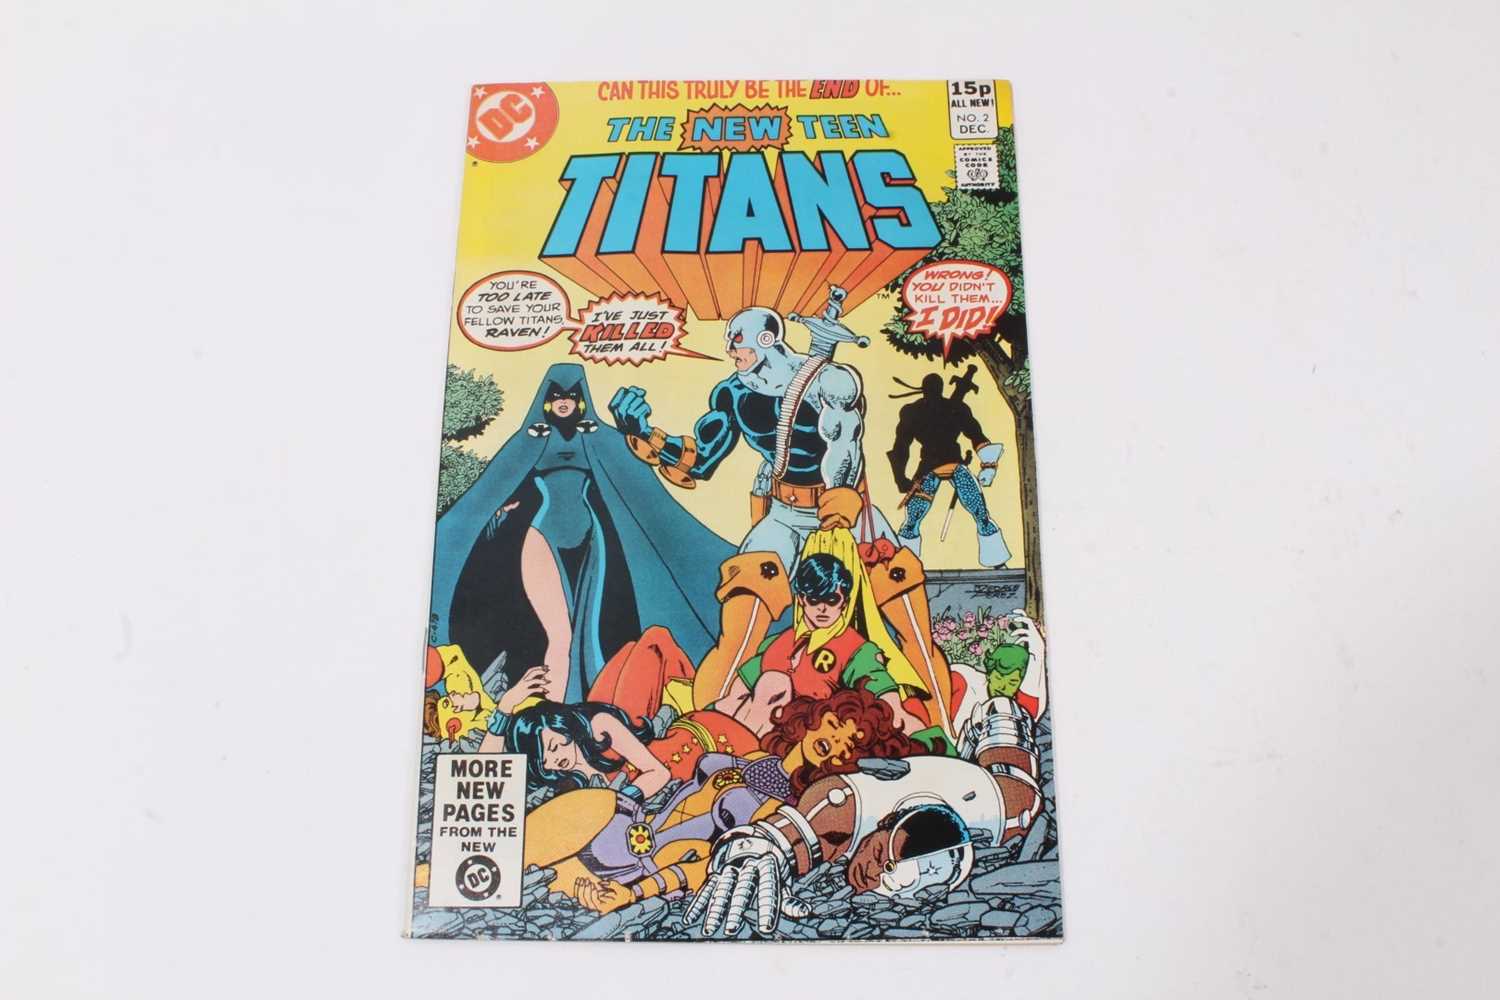 Lot 13 - DC Comics, 1980 The New Teen Titans #2. First appearance of Deathstroke. Priced 15p